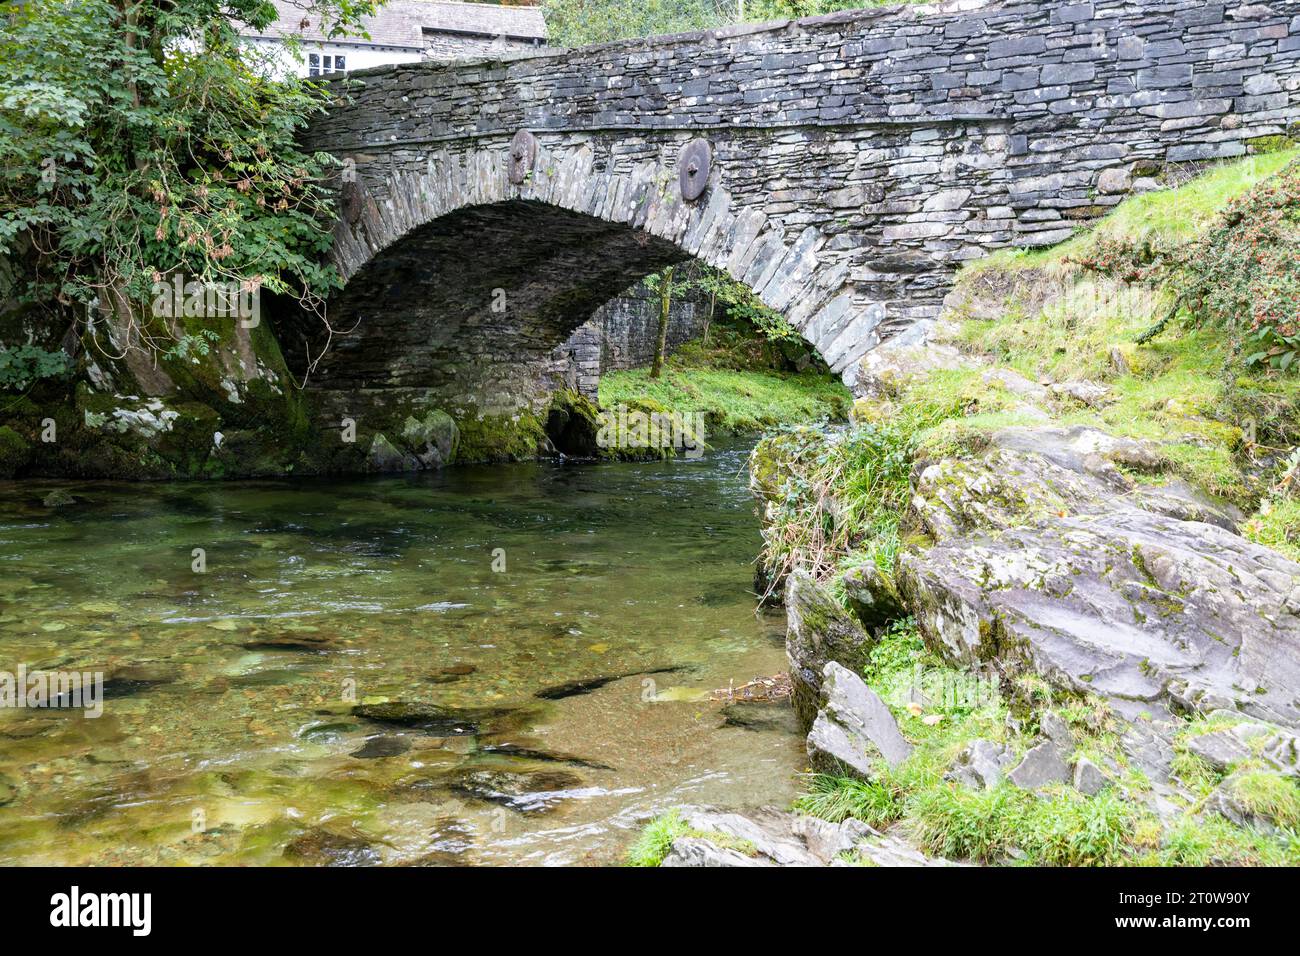 Elterwater village and bridge in the Lake District, River Brathay flows beneath this 18th century Grade 2 listed bridge, Cumbria,England,UK Stock Photo